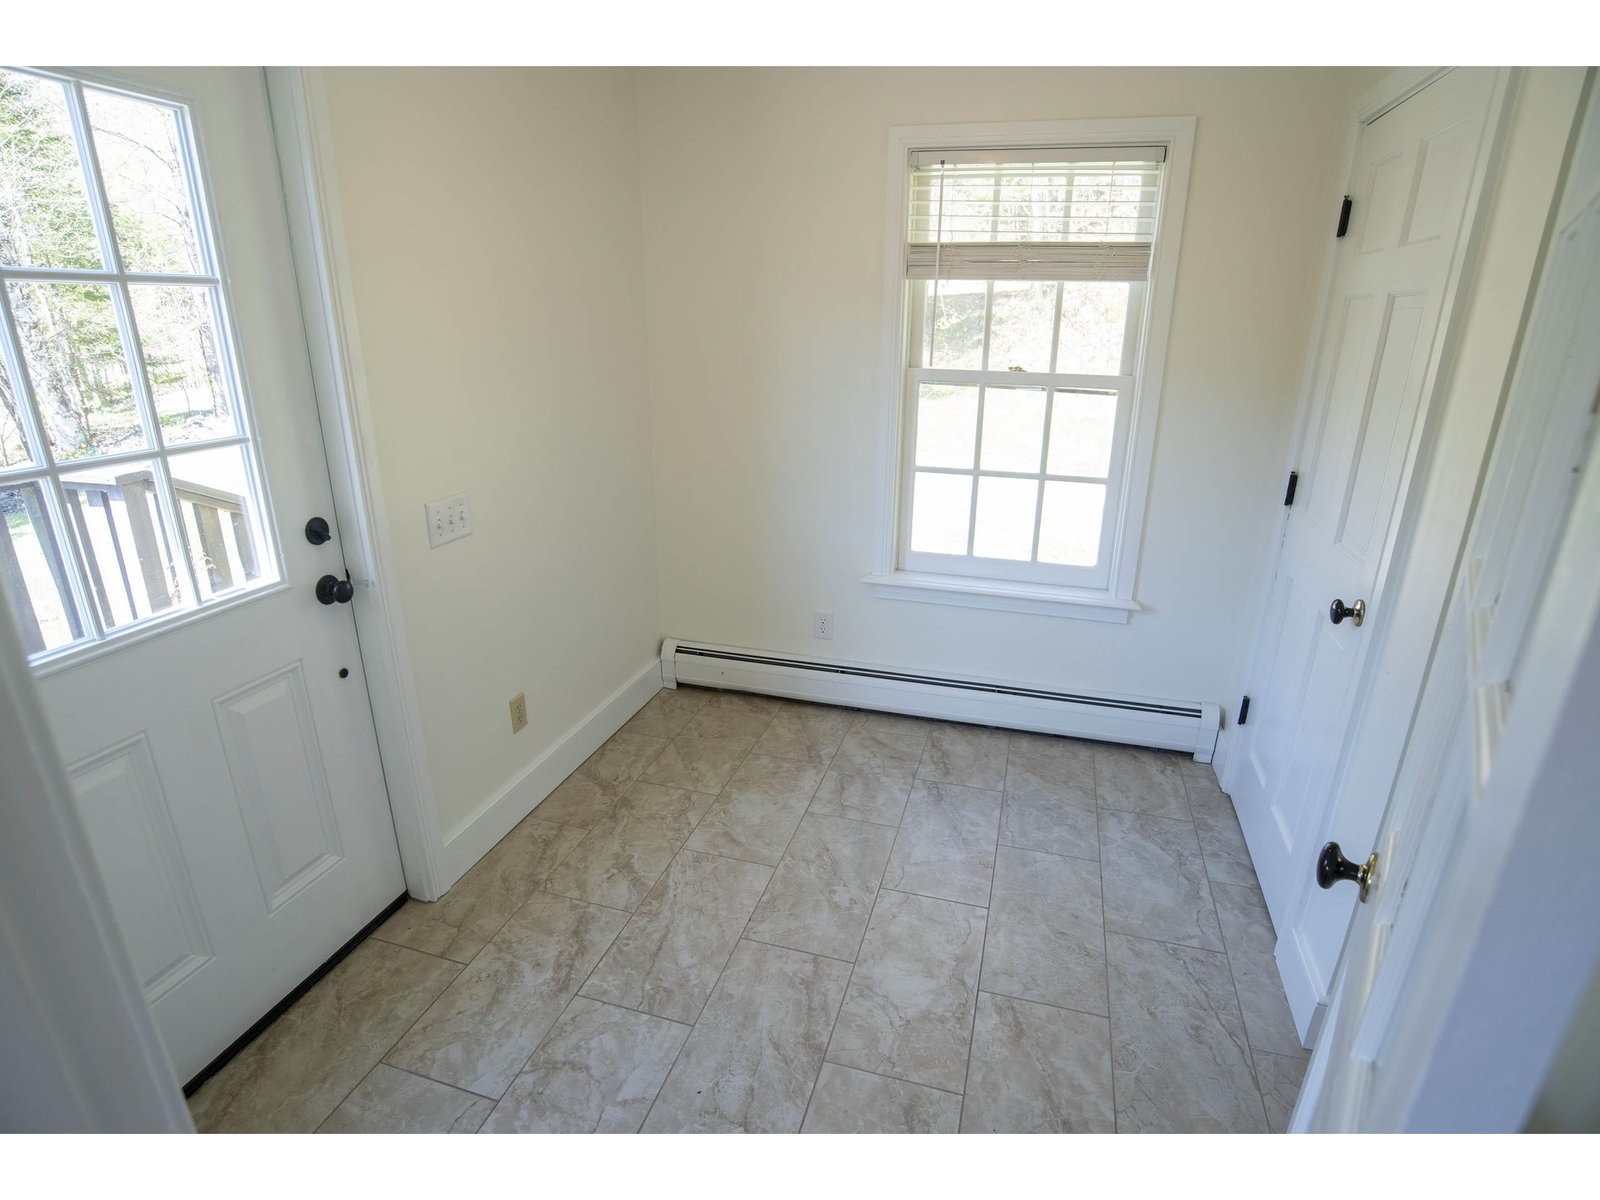 Tiled Mudroom with Closet